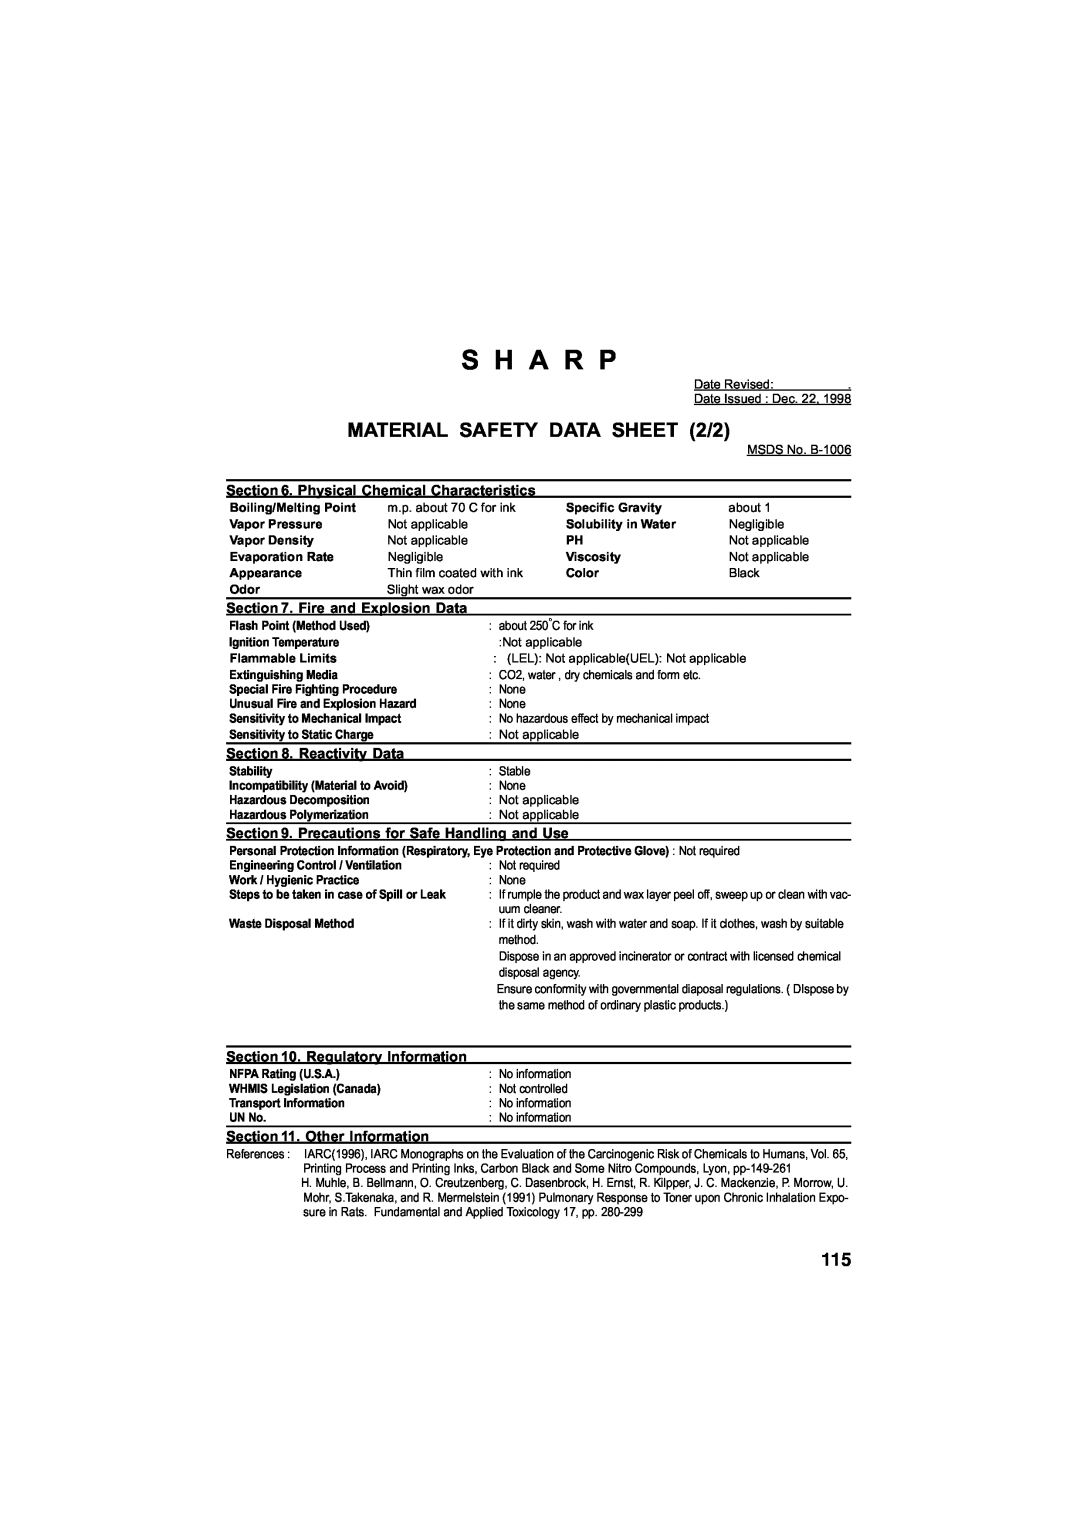 Sharp UX-340LM manual S H A R P, MATERIAL SAFETY DATA SHEET 2/2, Physical Chemical Characteristics, Fire and Explosion Data 